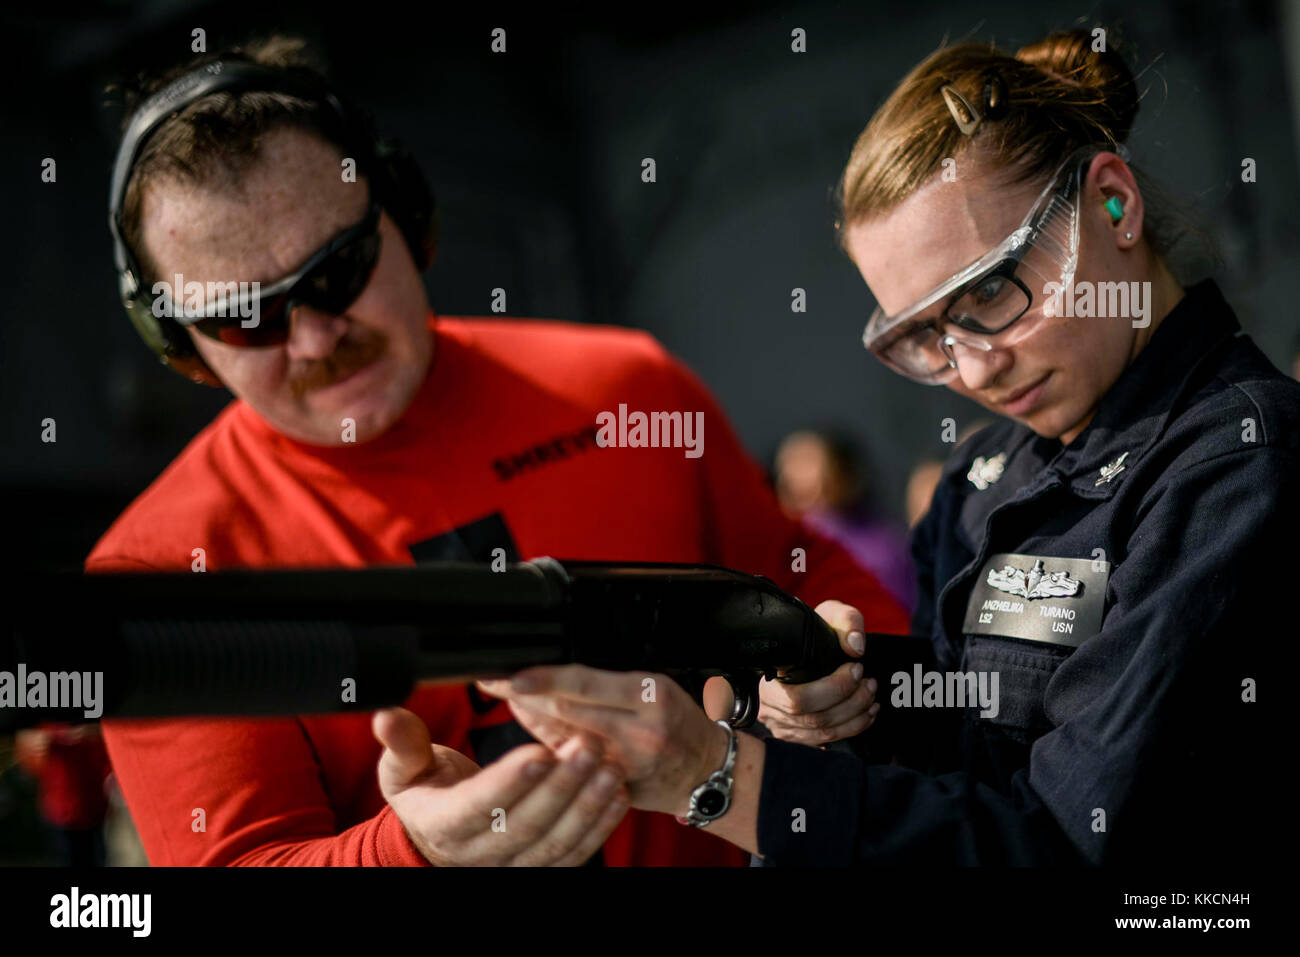 INDIAN OCEAN (Nov. 26, 2017) Aviation Ordnanceman 1st Class John Shreve instructs Logistics Specialist 2nd Class Anzhelika Turano on proper weapon handling while shooting a M500 shotgun off the fantail of the aircraft carrier USS Theodore Roosevelt (CVN 71) during a weapons qualification course. Theodore Roosevelt is deployed in support of maritime security operations and theater security cooperation efforts. (U.S. Navy photo by Mass Communication Specialist 3rd Class Robyn B. Melvin) Stock Photo